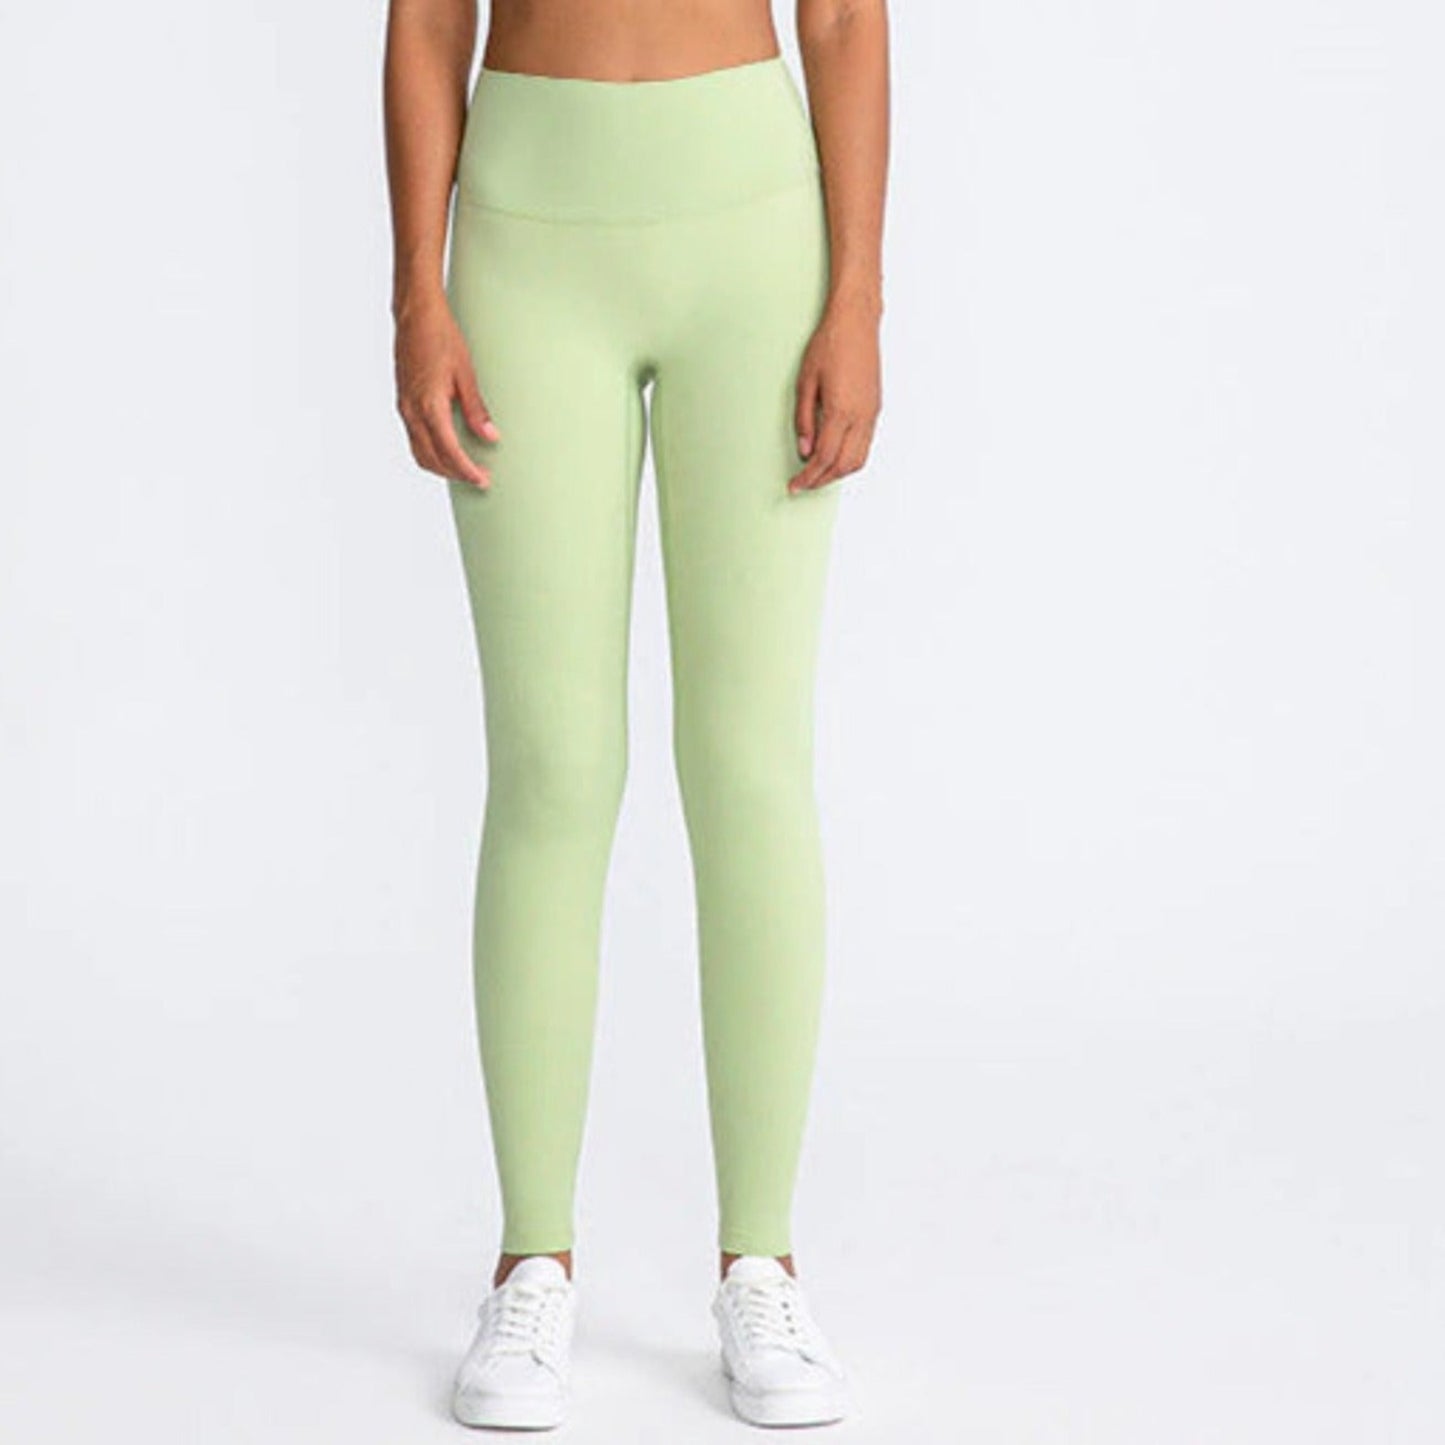 PISTACHIO COLOURED, HIGH RISE AND SQUAT PROOF LEGGINGS WORN BY MODEL ON A WHITE BACKGROUND